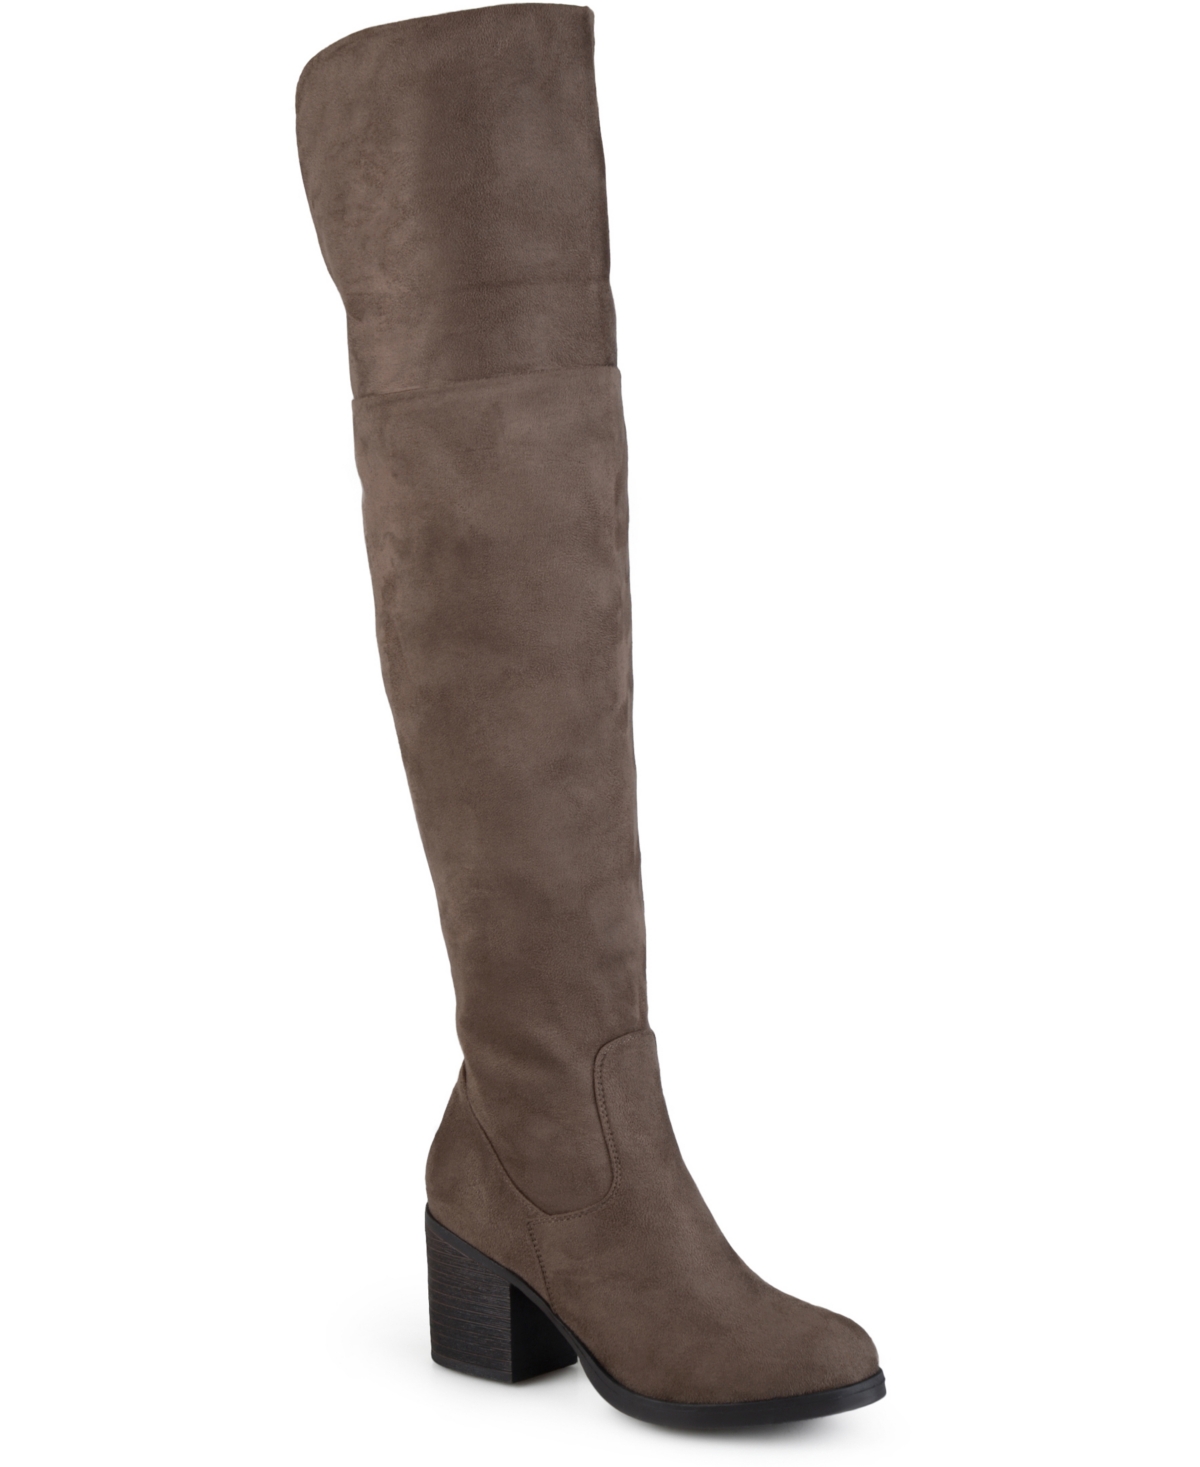 Women's Over The Knee Sana Boots - Taupe